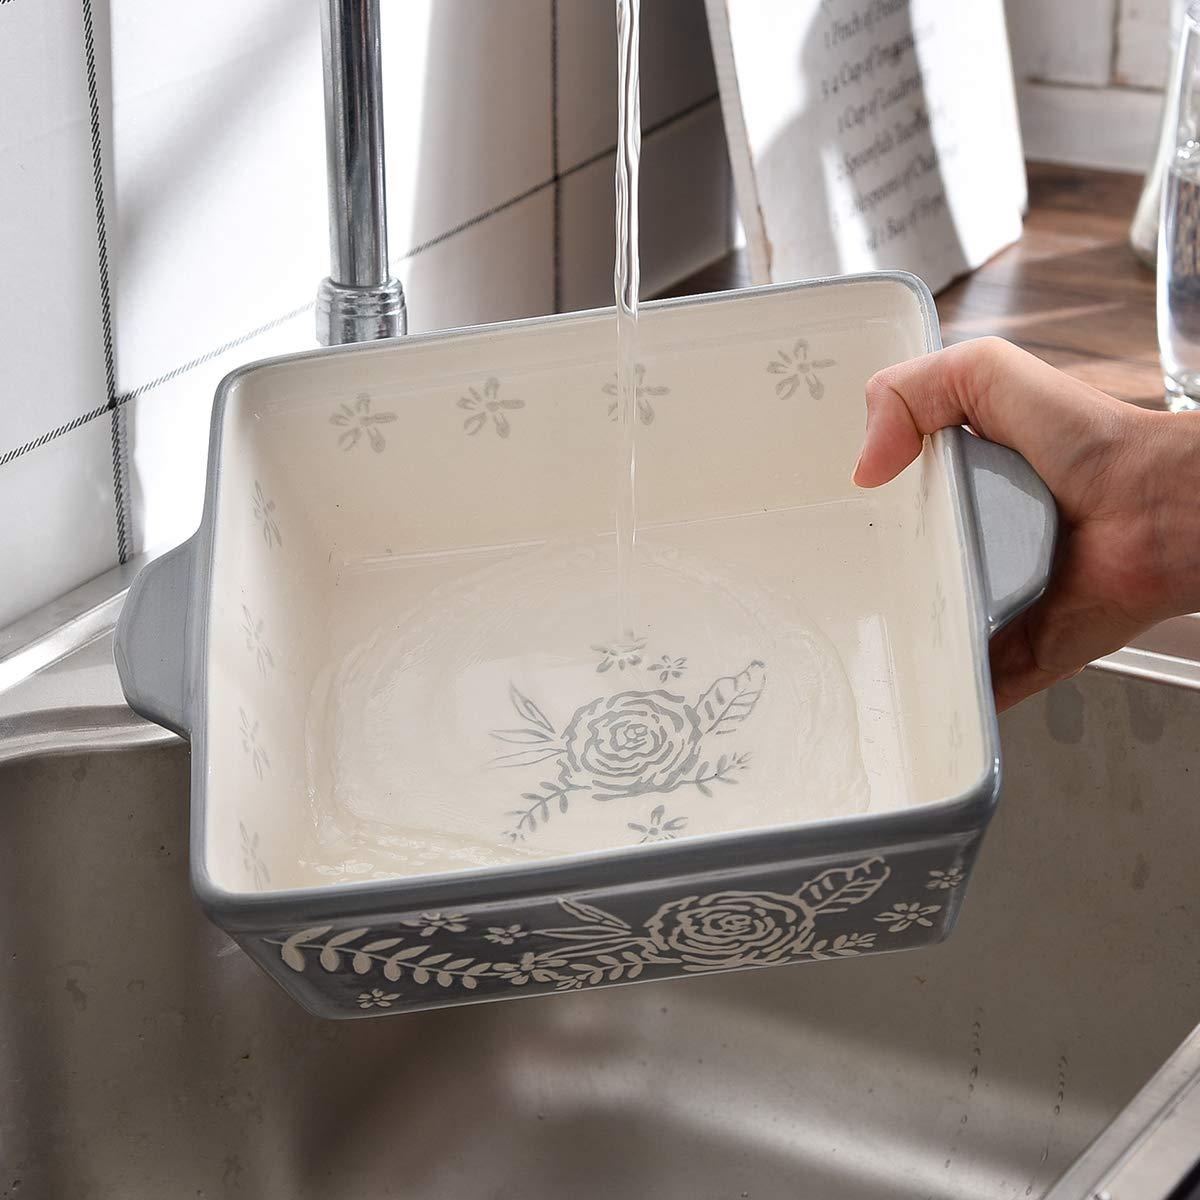 Wisenvoy Baking Dish 8x8 Baking Pan Brownie Pan Casserole Dish Hand-Painted Casserole Dishes For Oven Lasagna Pan - CookCave